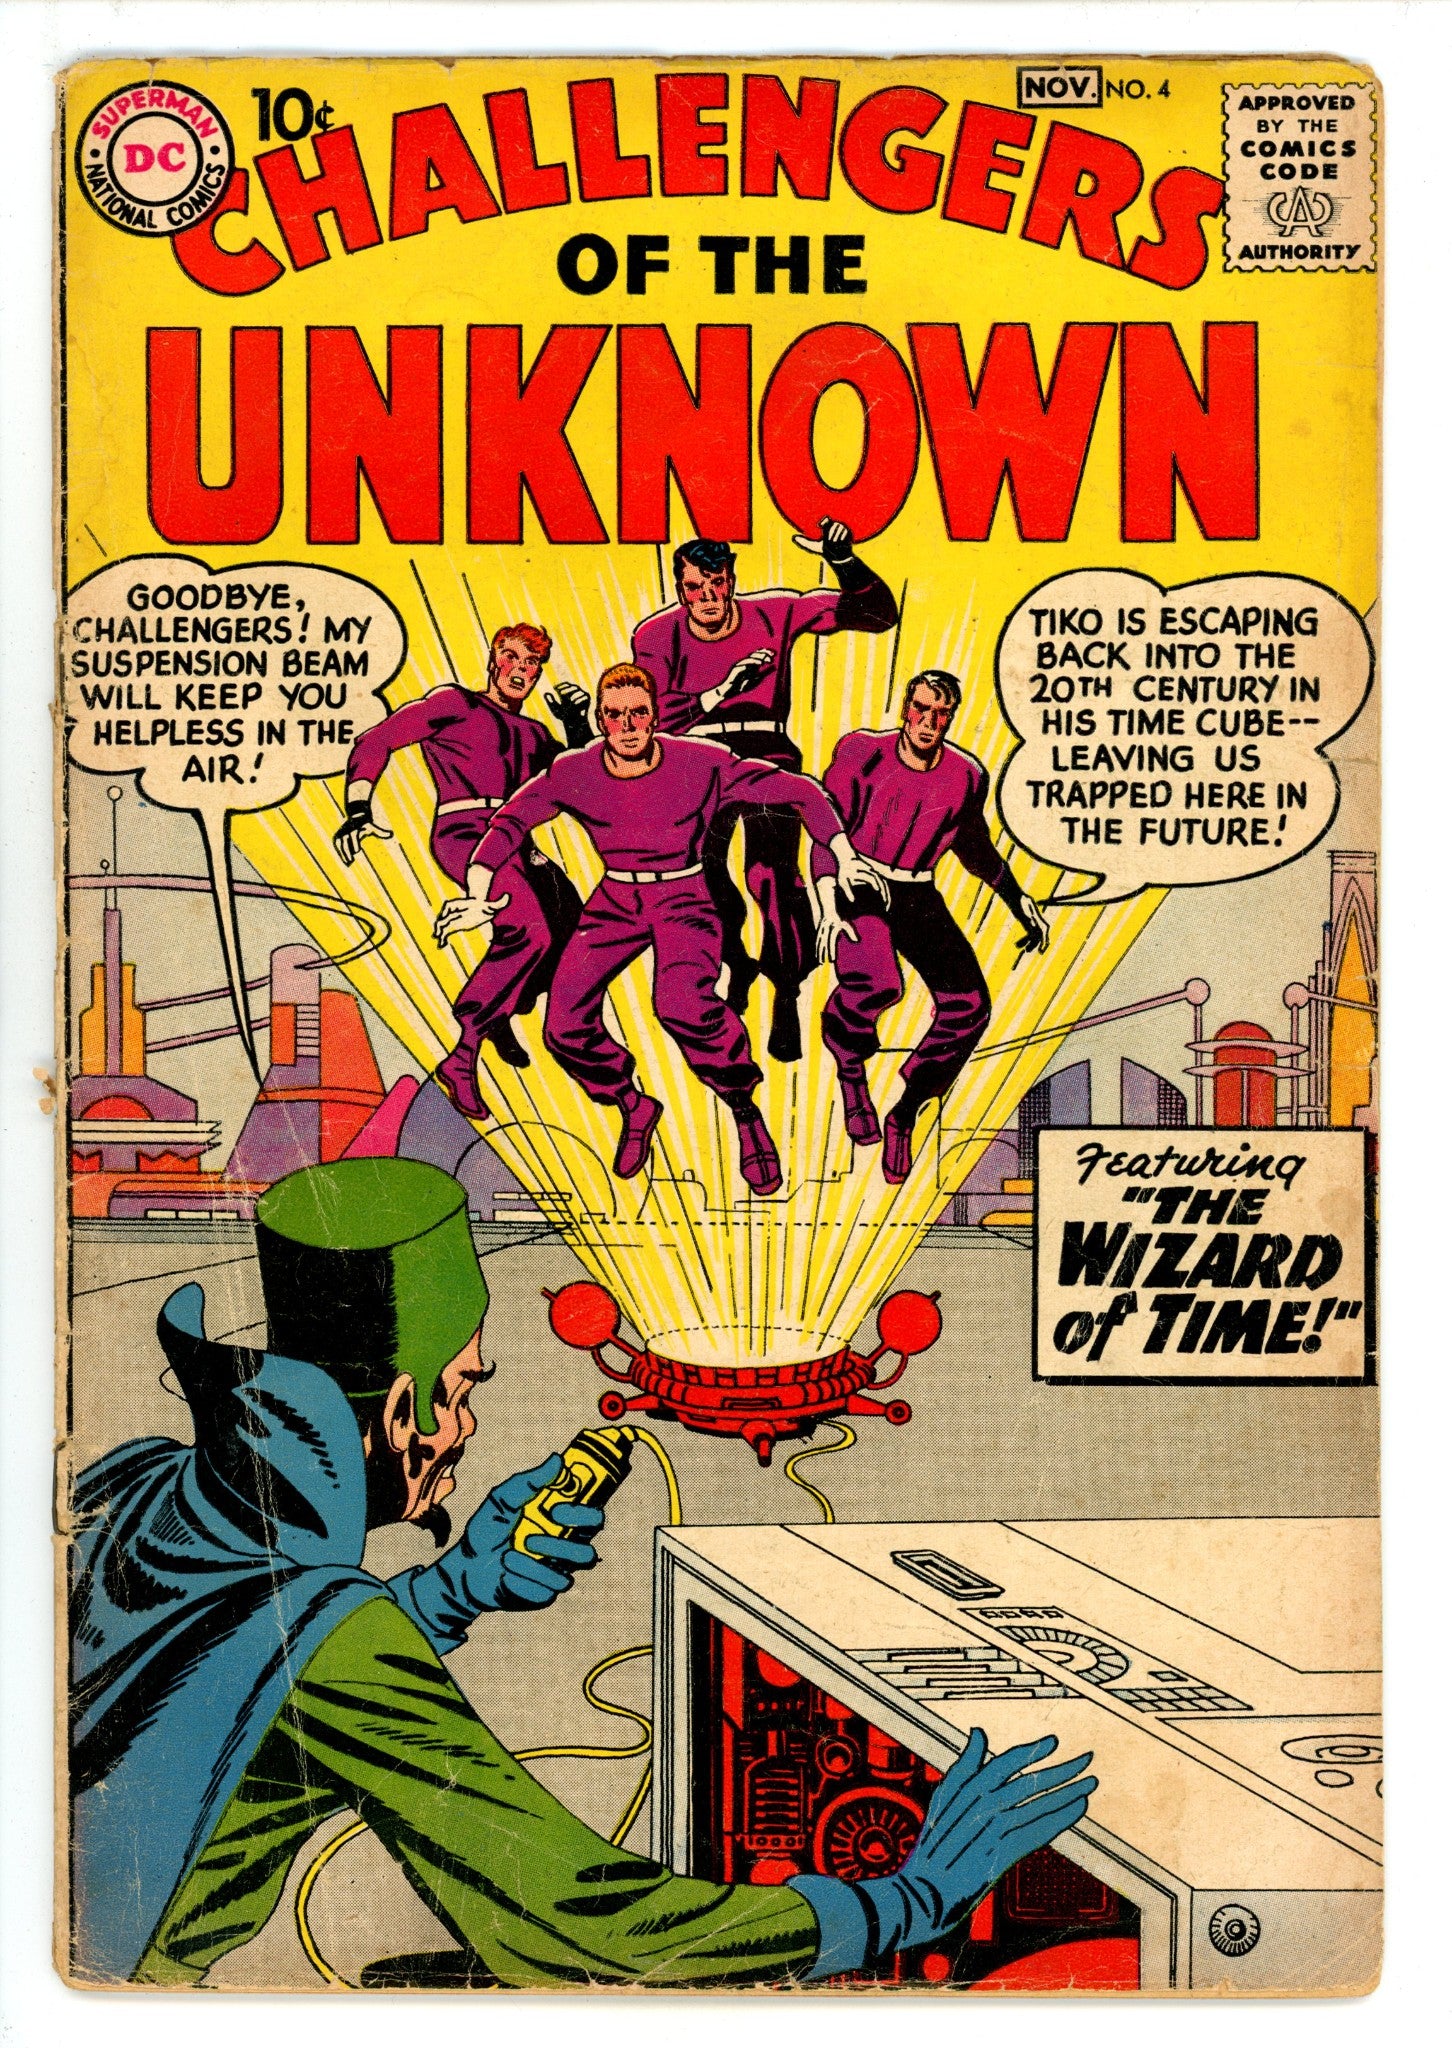 Challengers of the Unknown Vol 1 4 GD (2.0) (1958) 